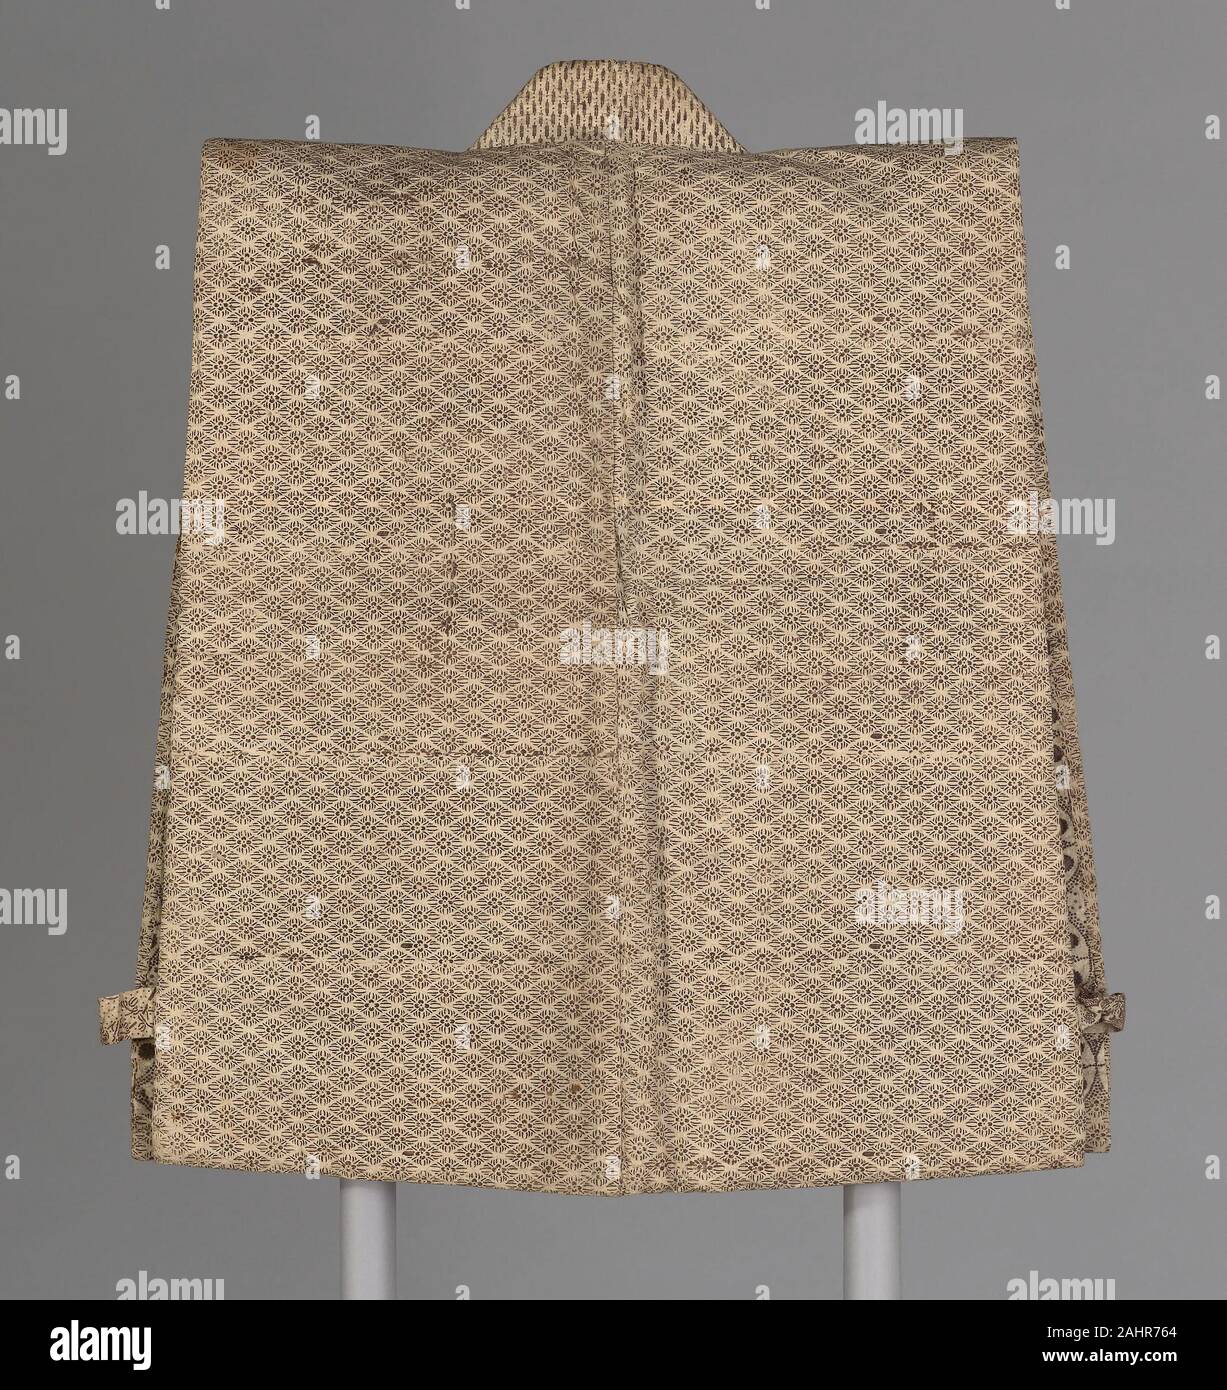 Surcoat or Vest. 1800–1900. Japan. Stencil on Japanese paper (probably kozo fiber) This garment, made with a higher quality of paper and workmanship than the haori nearby (2014.192), may well date from the last years of the Edo period (1615-1868) since the two principal patterns—interlocking sircles on the interior and floral lozenges on the exterior—were restricted to certain classes during that era. Although this surcoat lacks some of the military functionality of the example to the left (2015.283), it may be a version of a jinbaori, made at a time when samurai were bureaucrates, not warrior Stock Photo